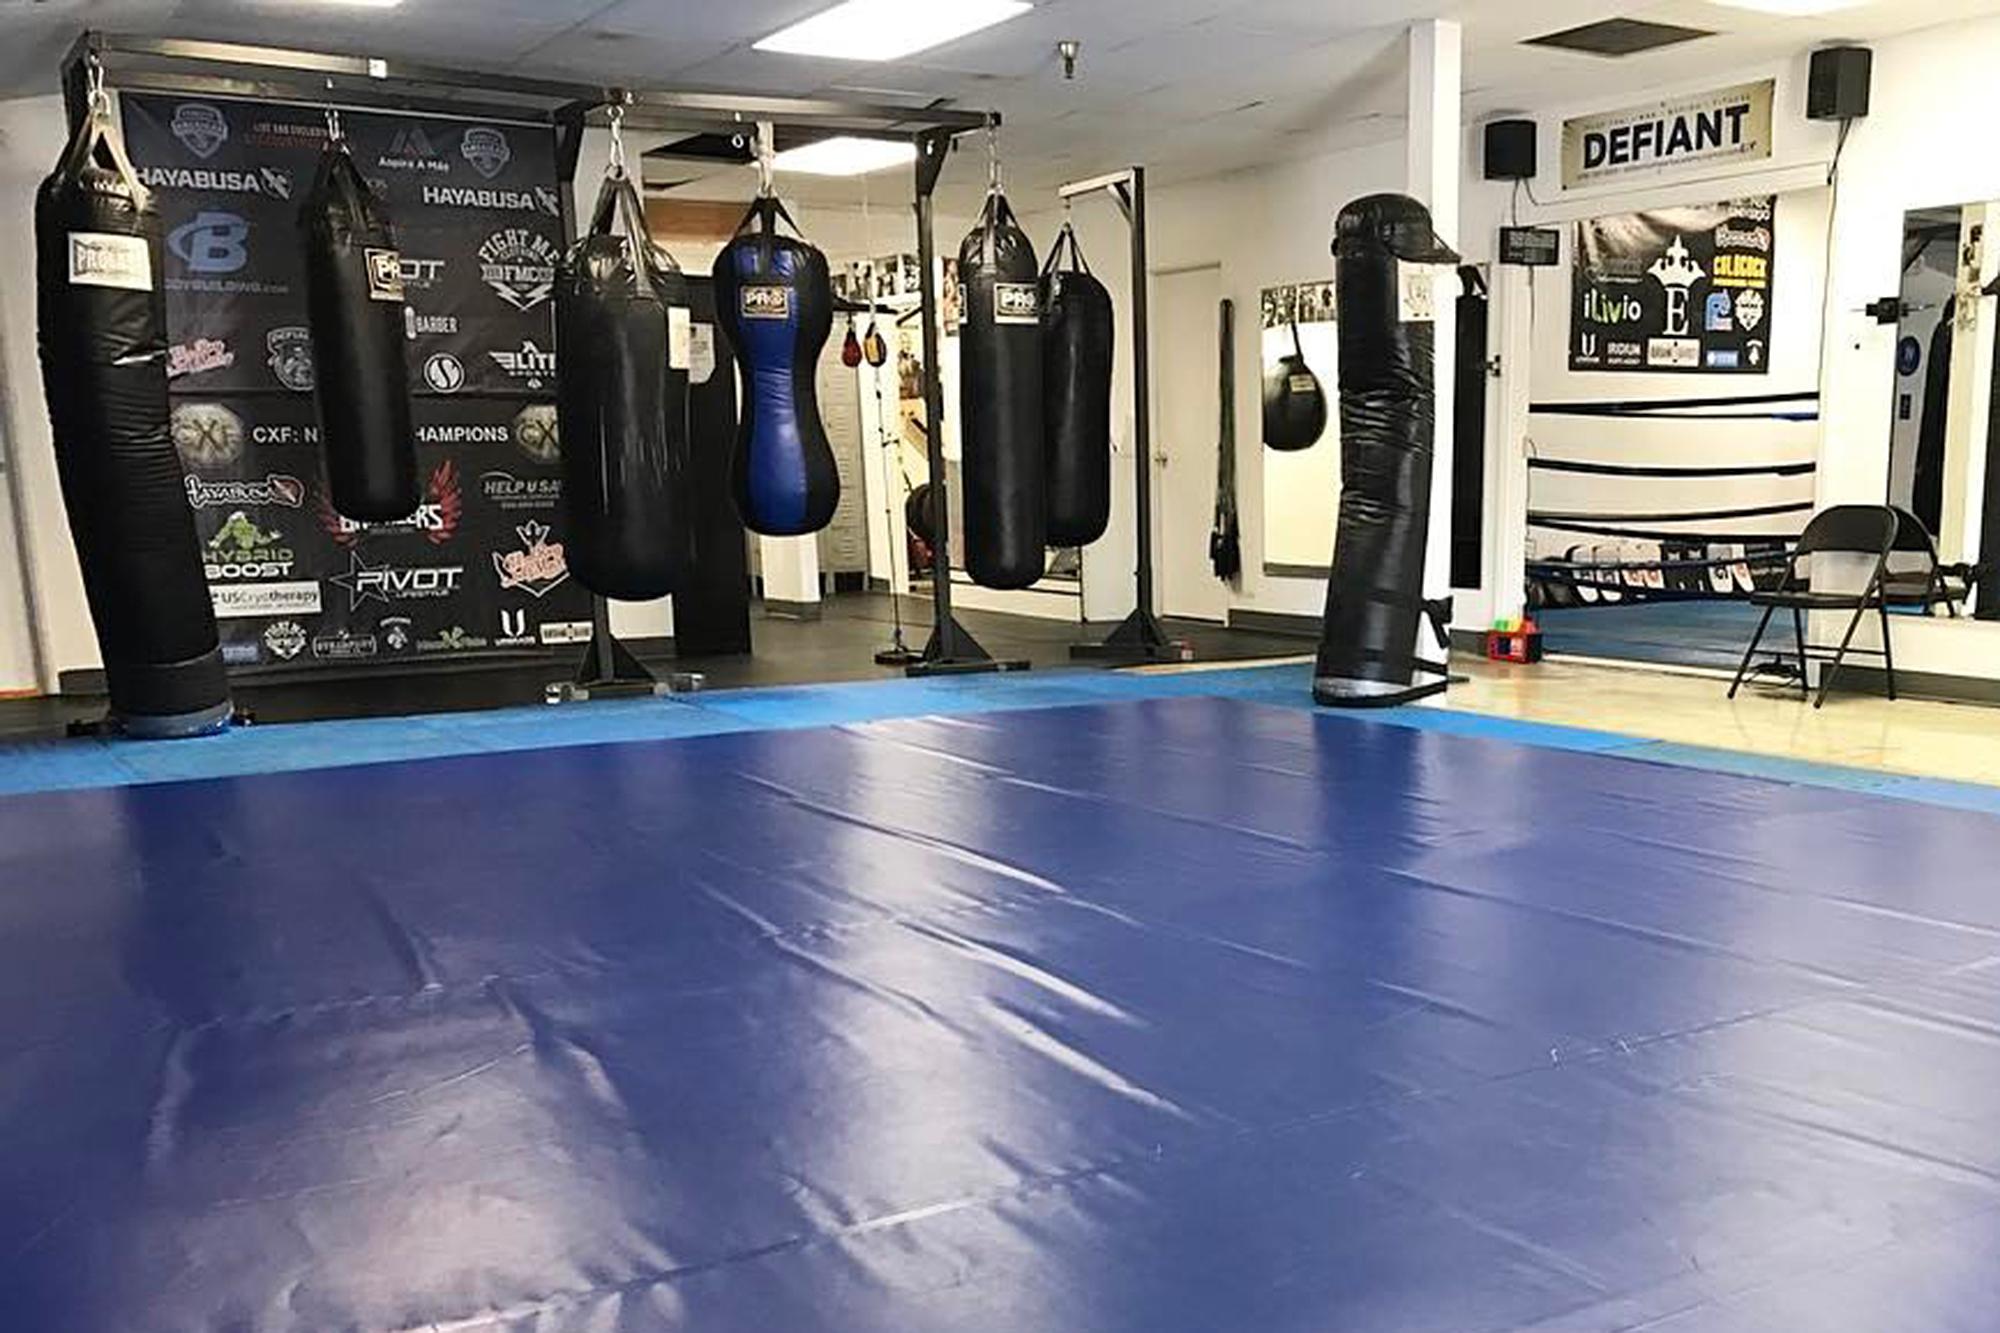 Defiant MMA & Fitness, where the incident took place.